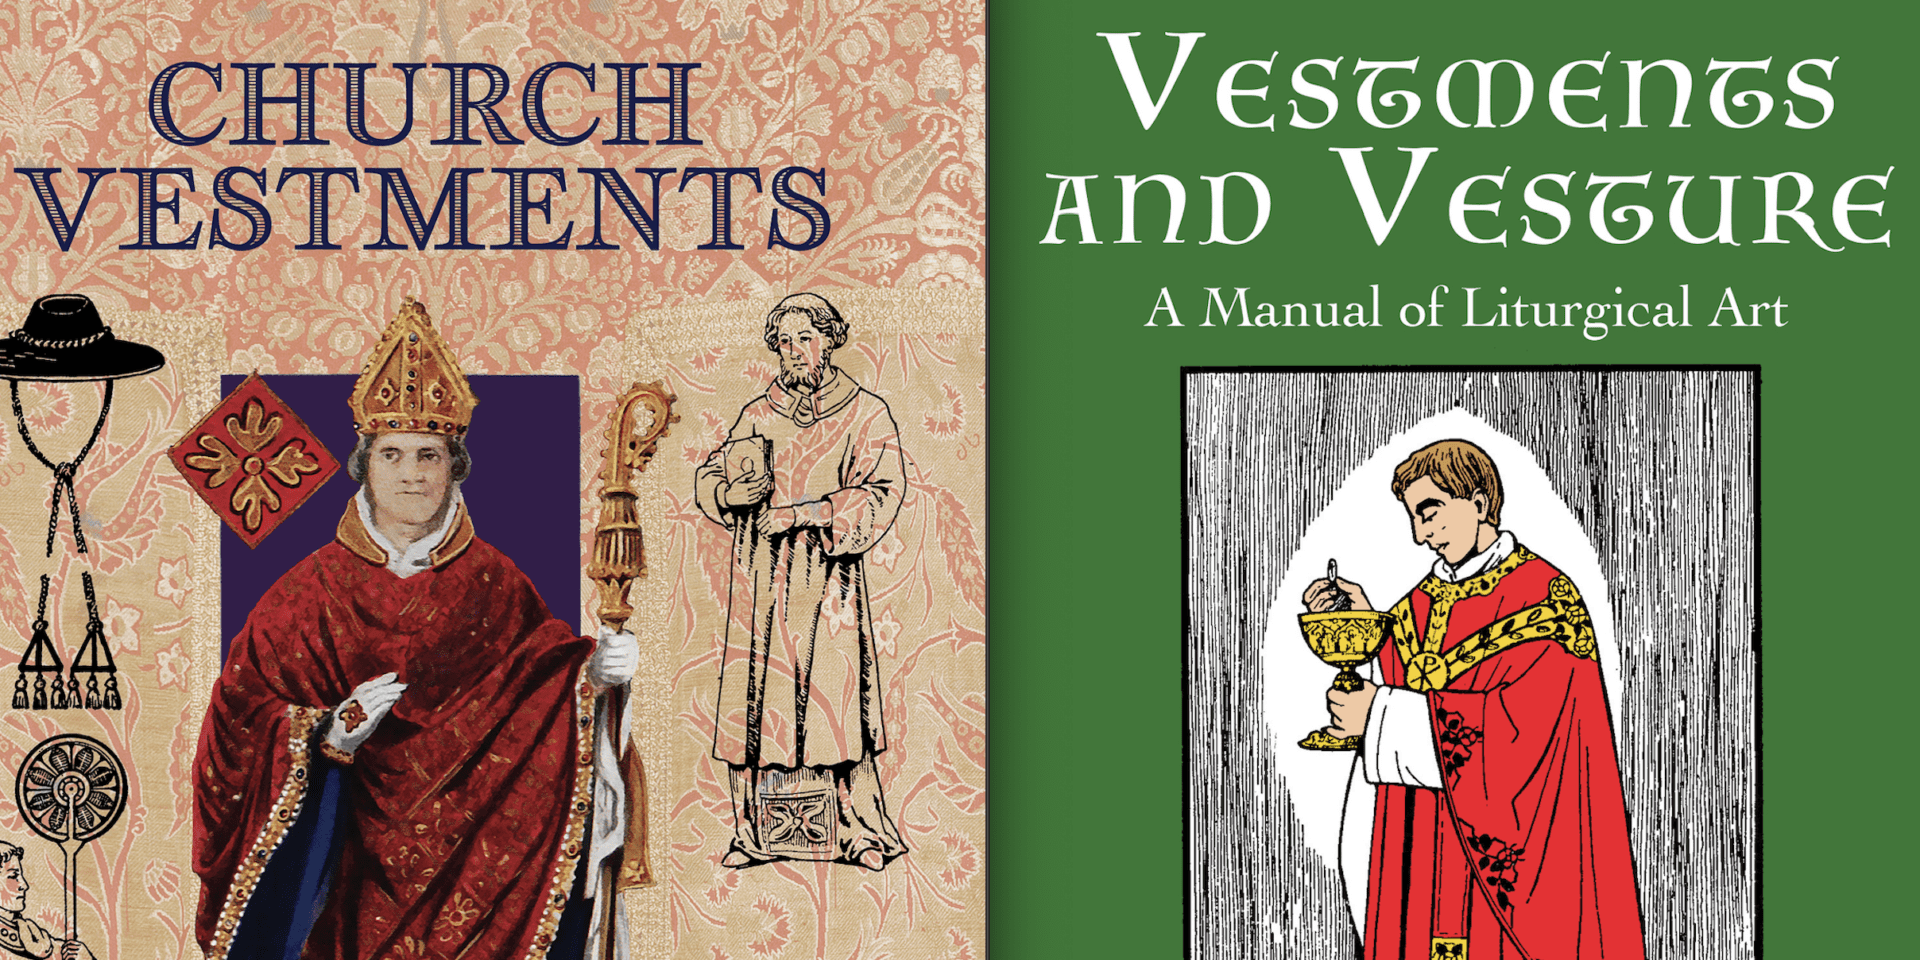 Two Classic Texts Help Expand Liturgical Horizons of the Clothes-Minded